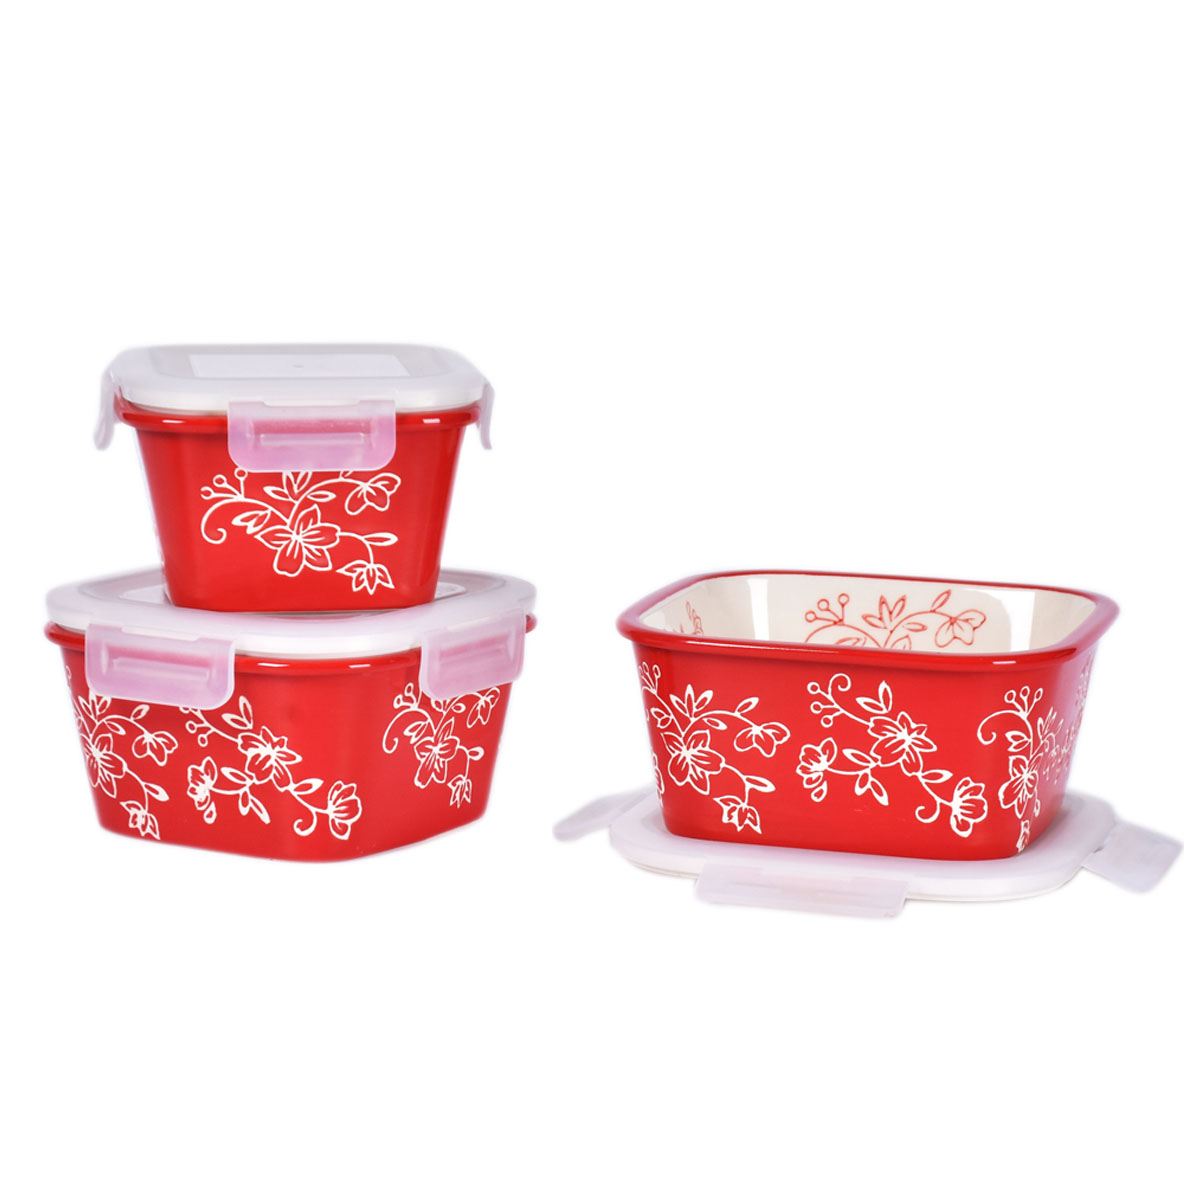 temp-tations® Floral Lace Nesting Square Ceramic Containers with Lid – 3 Piece – Red